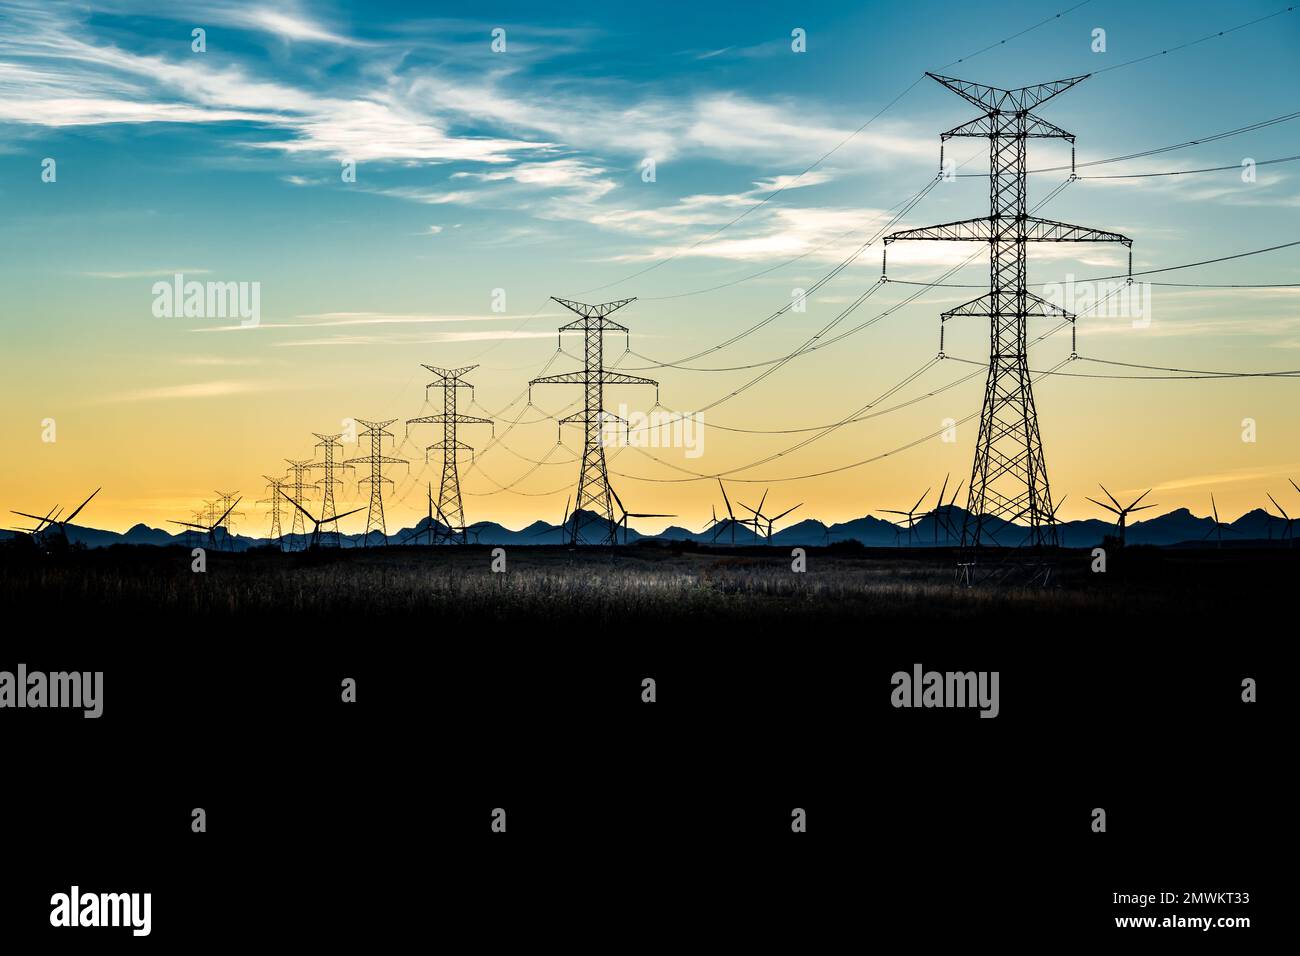 Sunset silhouette of steel lattice transmission towers and power lines overlooking distant mountains and windmills. Stock Photo